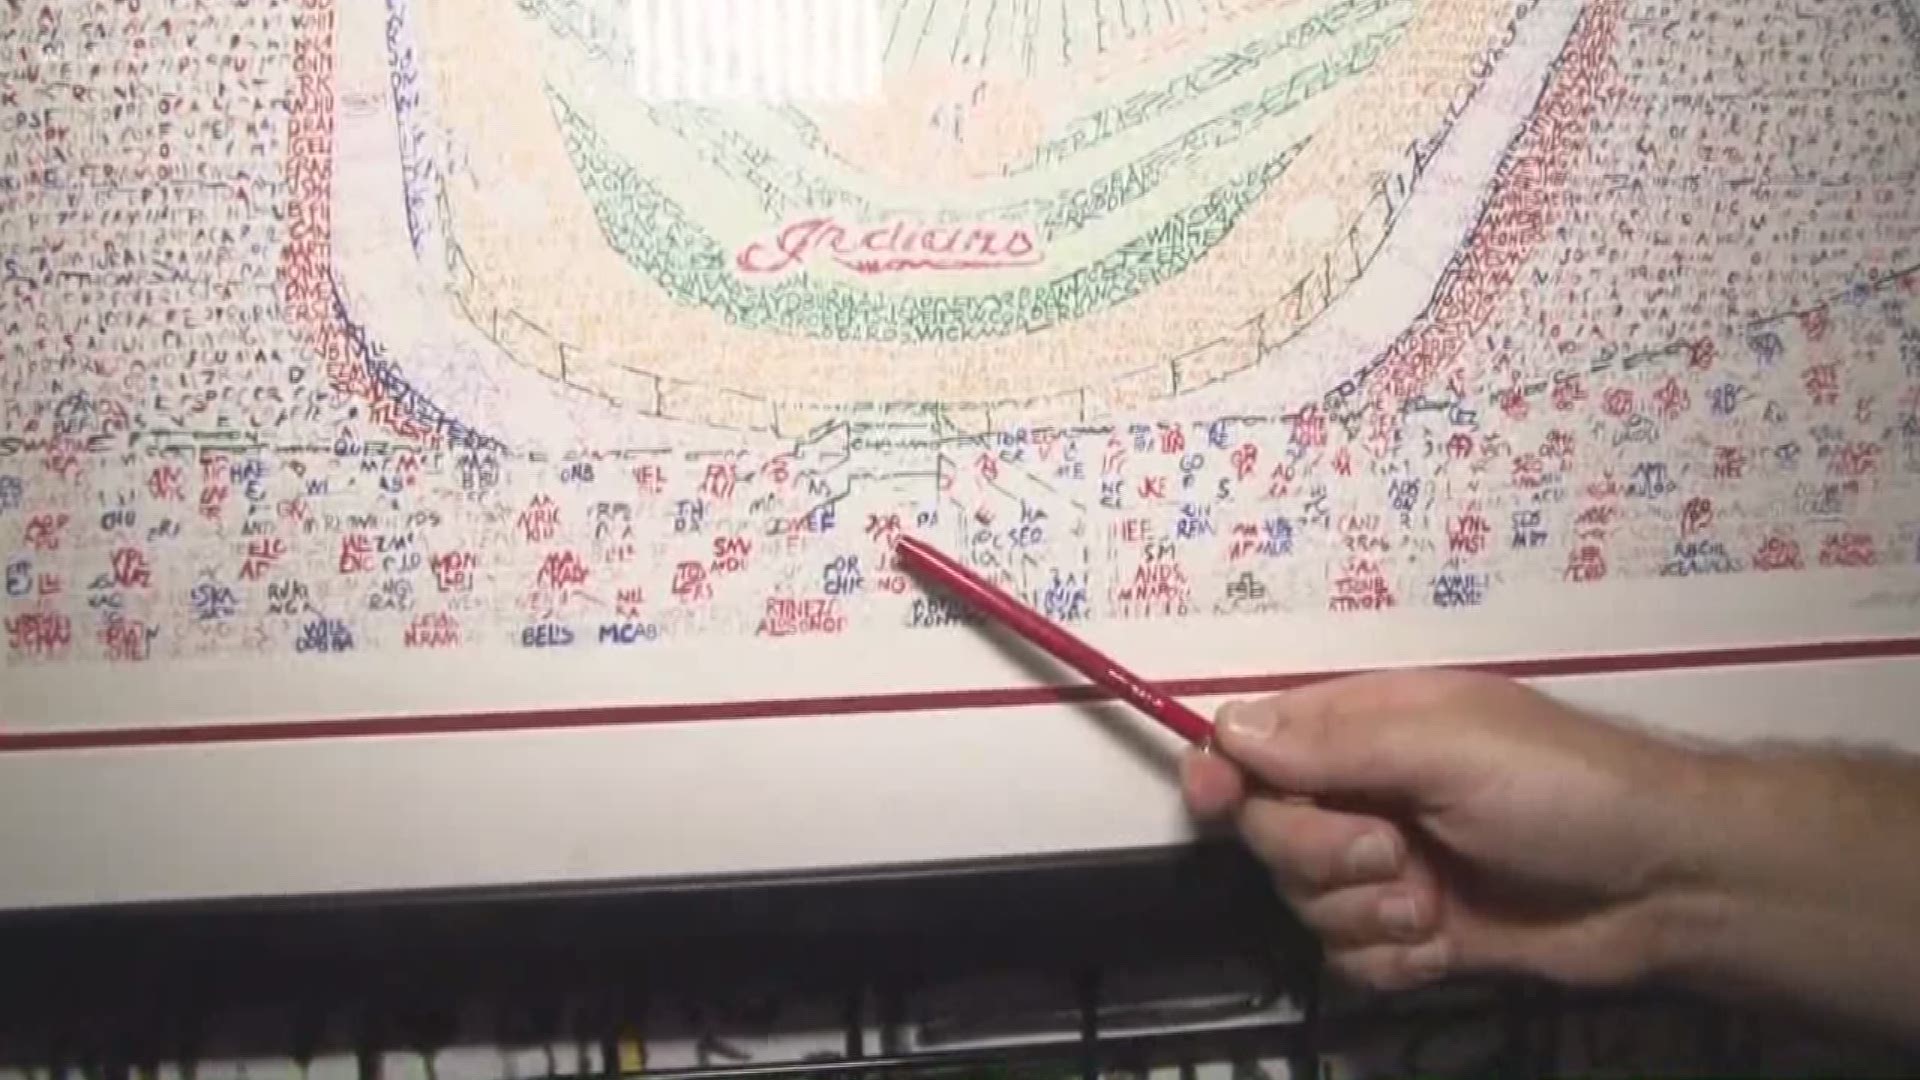 July 8, 2019: He uses words to make art, and one of his pieces highlighting Jacobs Field has been getting a lot of attention. Dan Duffy took the name of every Cleveland Indians player -- all 1,875 of them -- and placed it inside a special picture. He shared some of his artwork with WKYC’s Jasmine Monroe at the MLB ALL-Star Game’s PLAY BALL Park event.